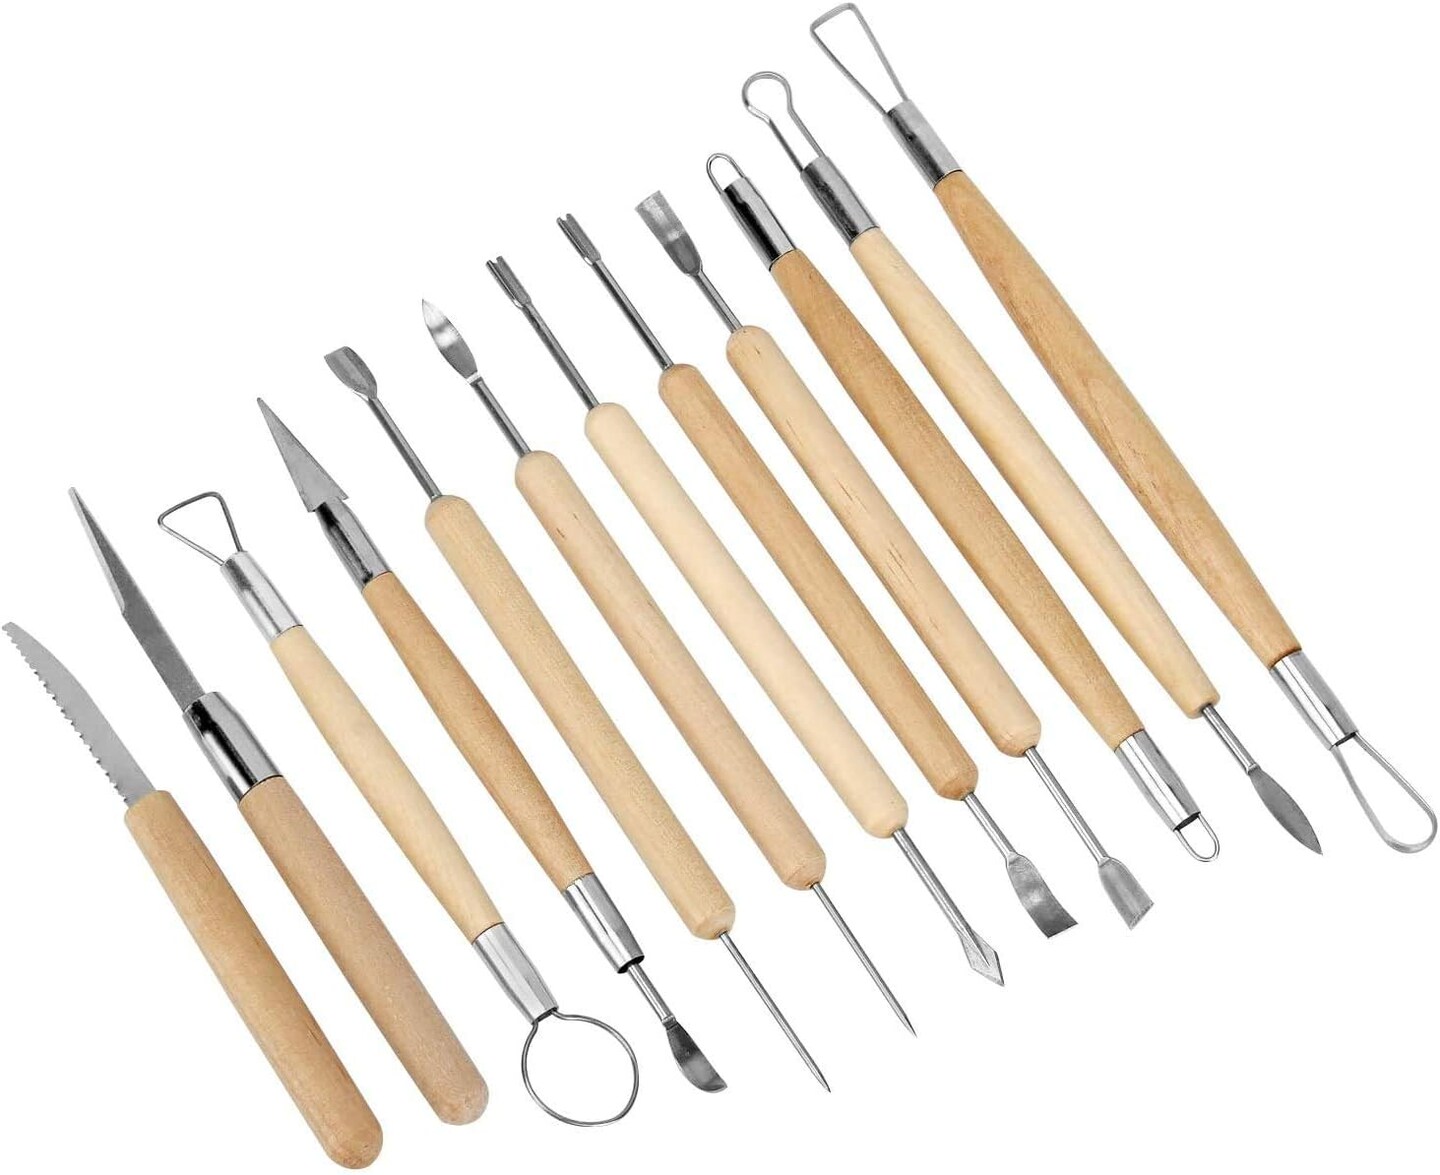 Set of 30 Clay Sculpting Tools Wooden Handle Pottery Carving Tool Kit